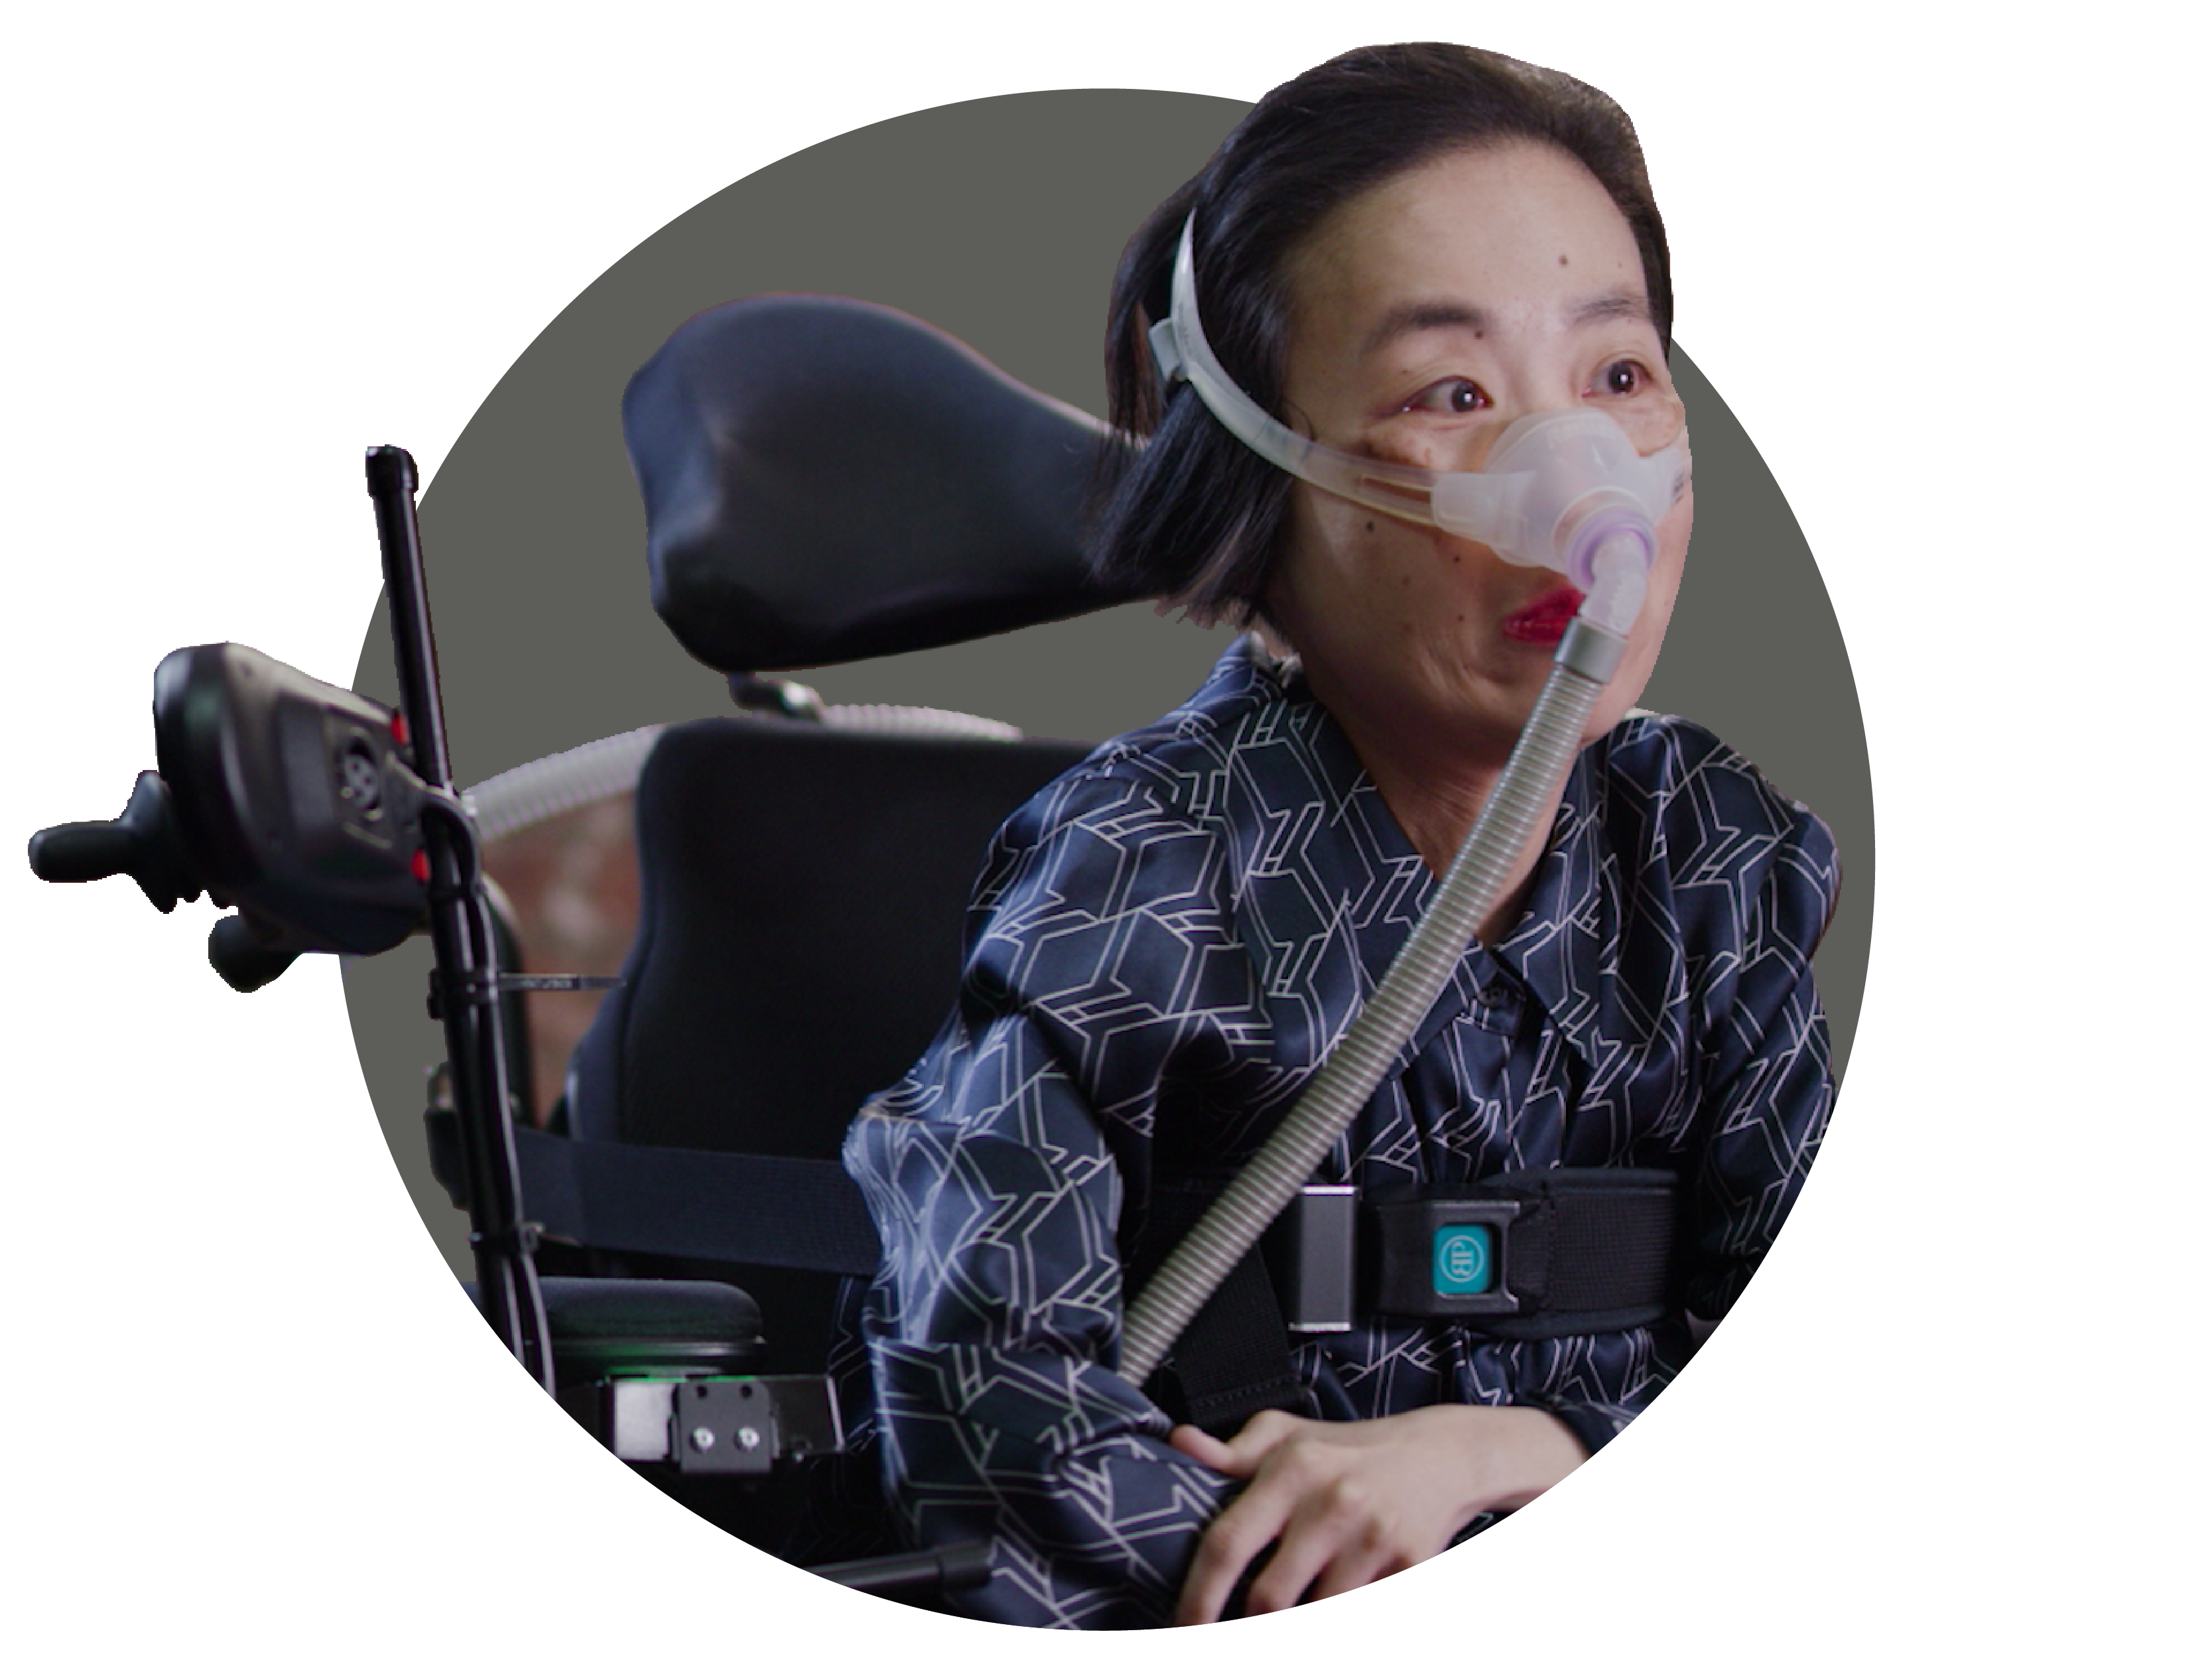 Alice Wong, an Asian American woman in a wheelchair wearing a mask over her nose attached to a tube for a BiPAP machine that helps her breathe. She is wearing a navy striped shirt and dark pants.